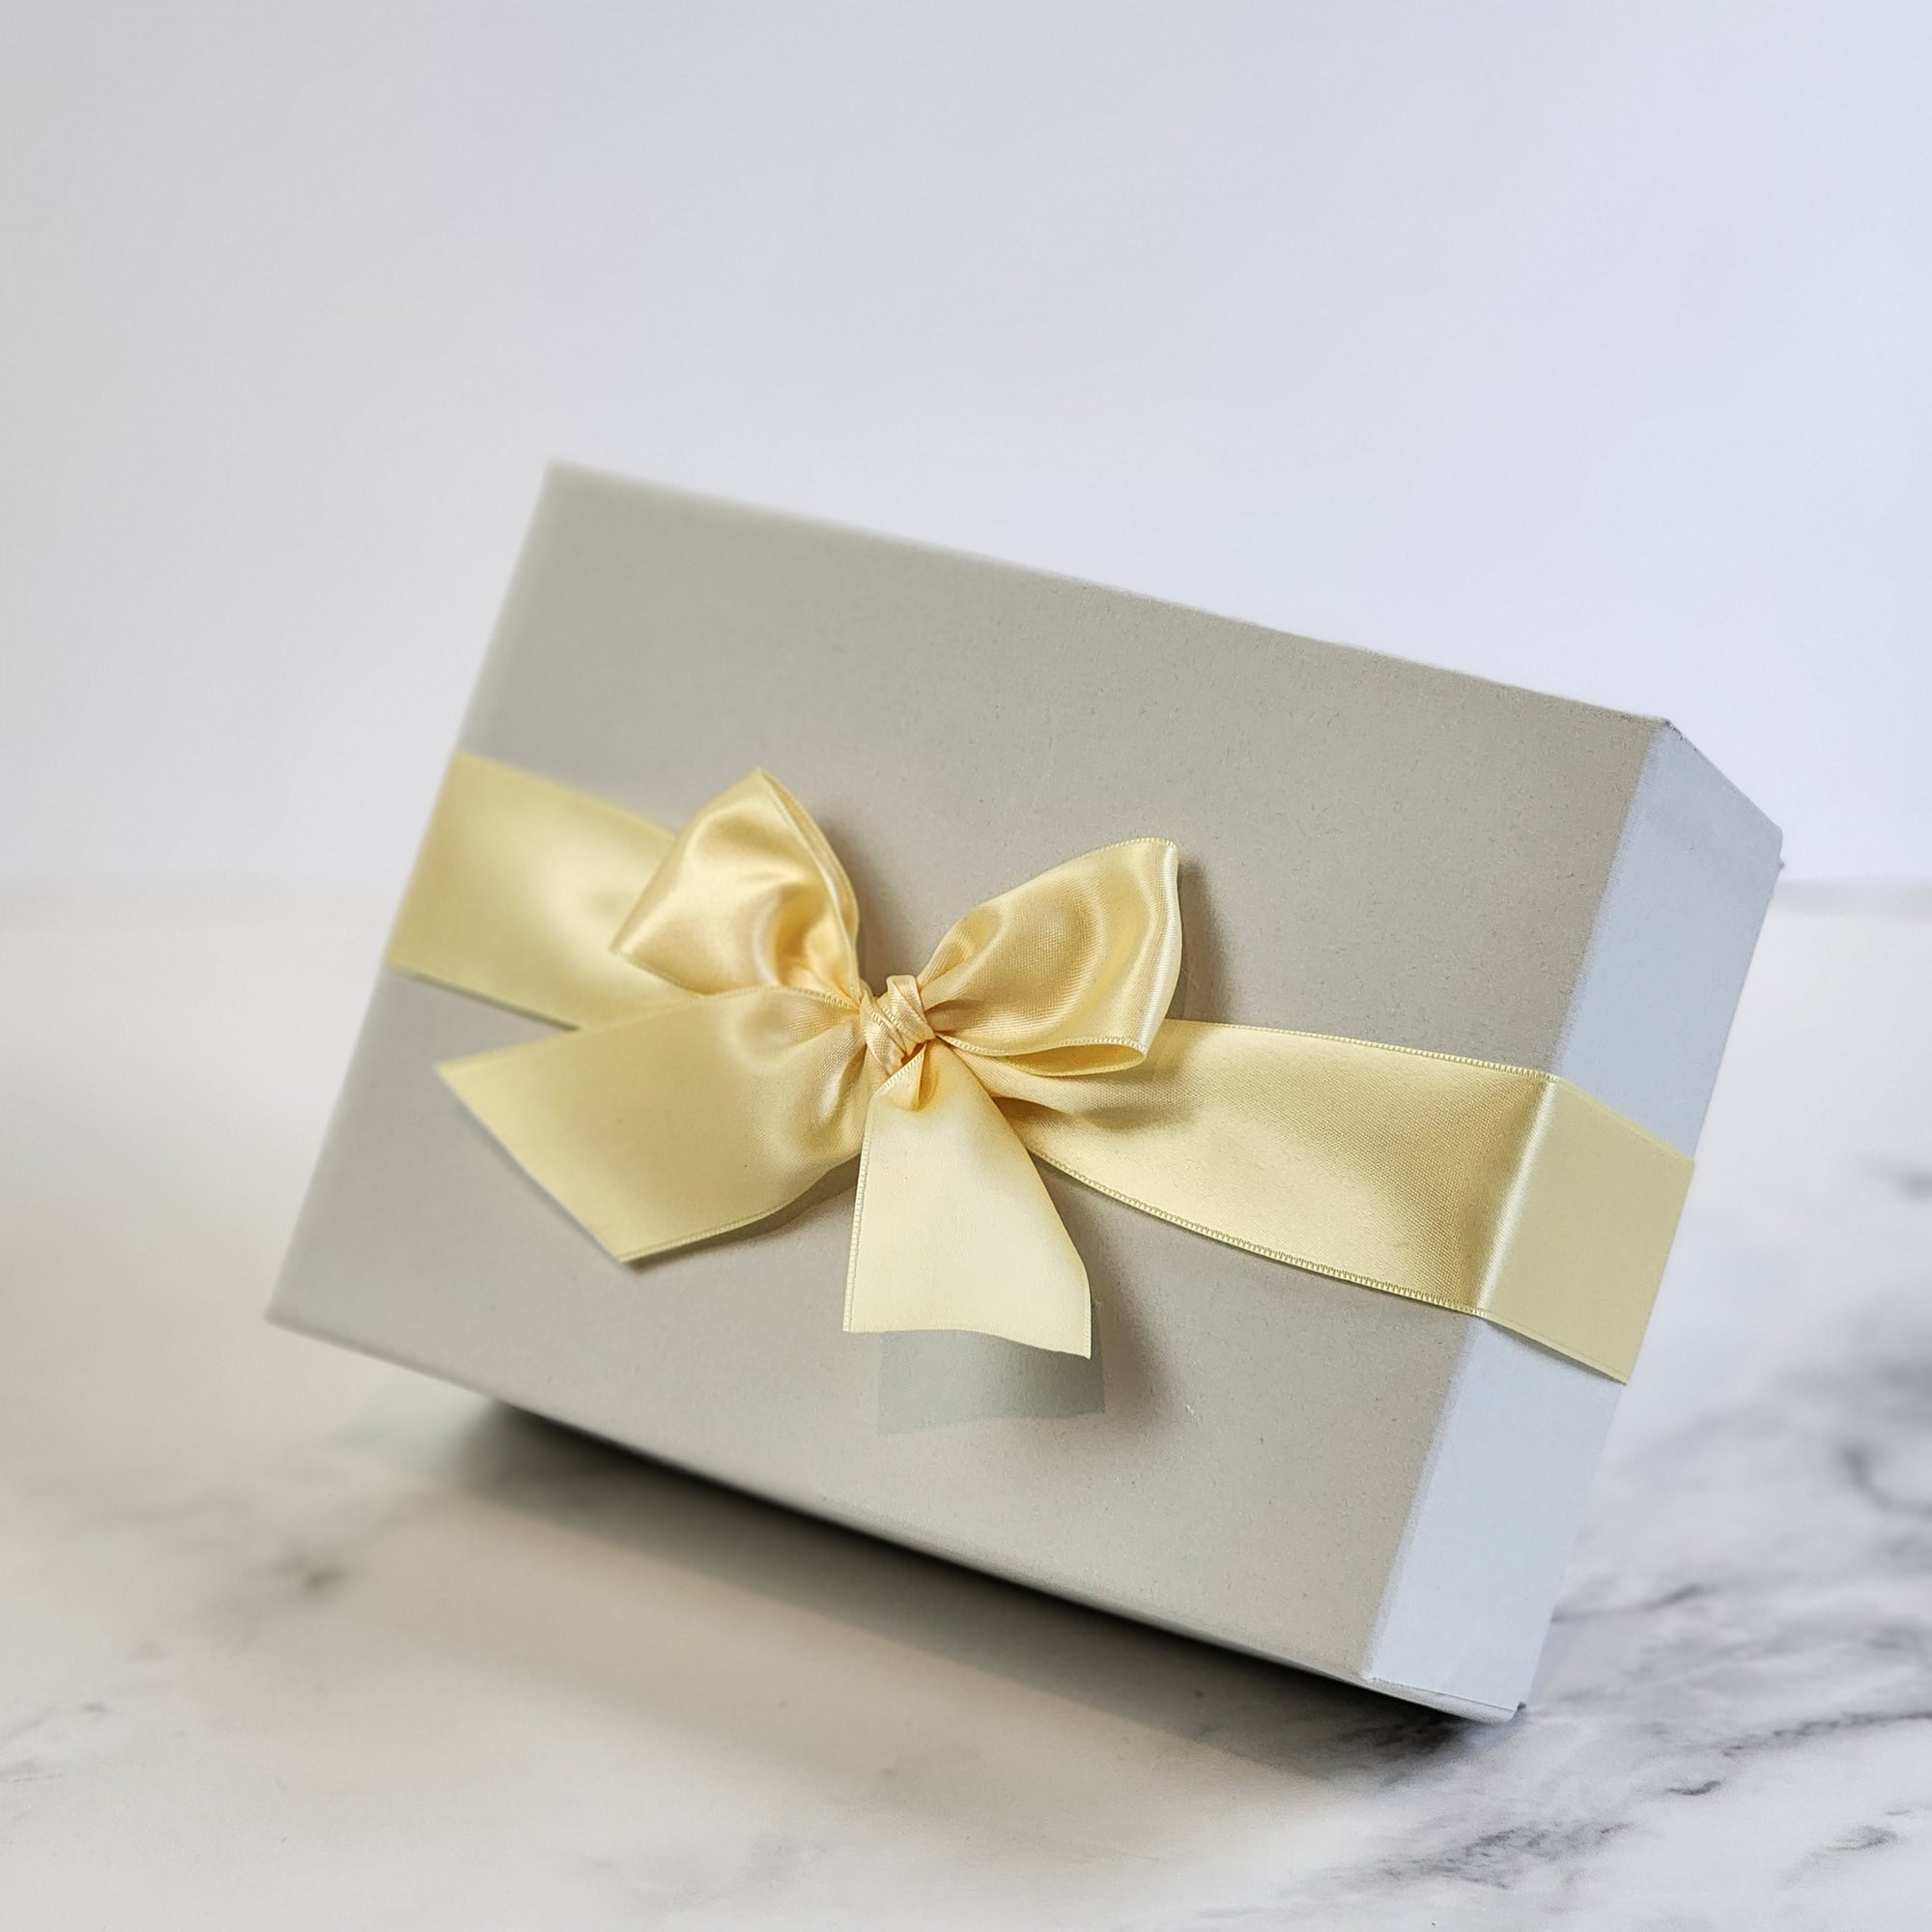 Cup of Sunshine Gift Box